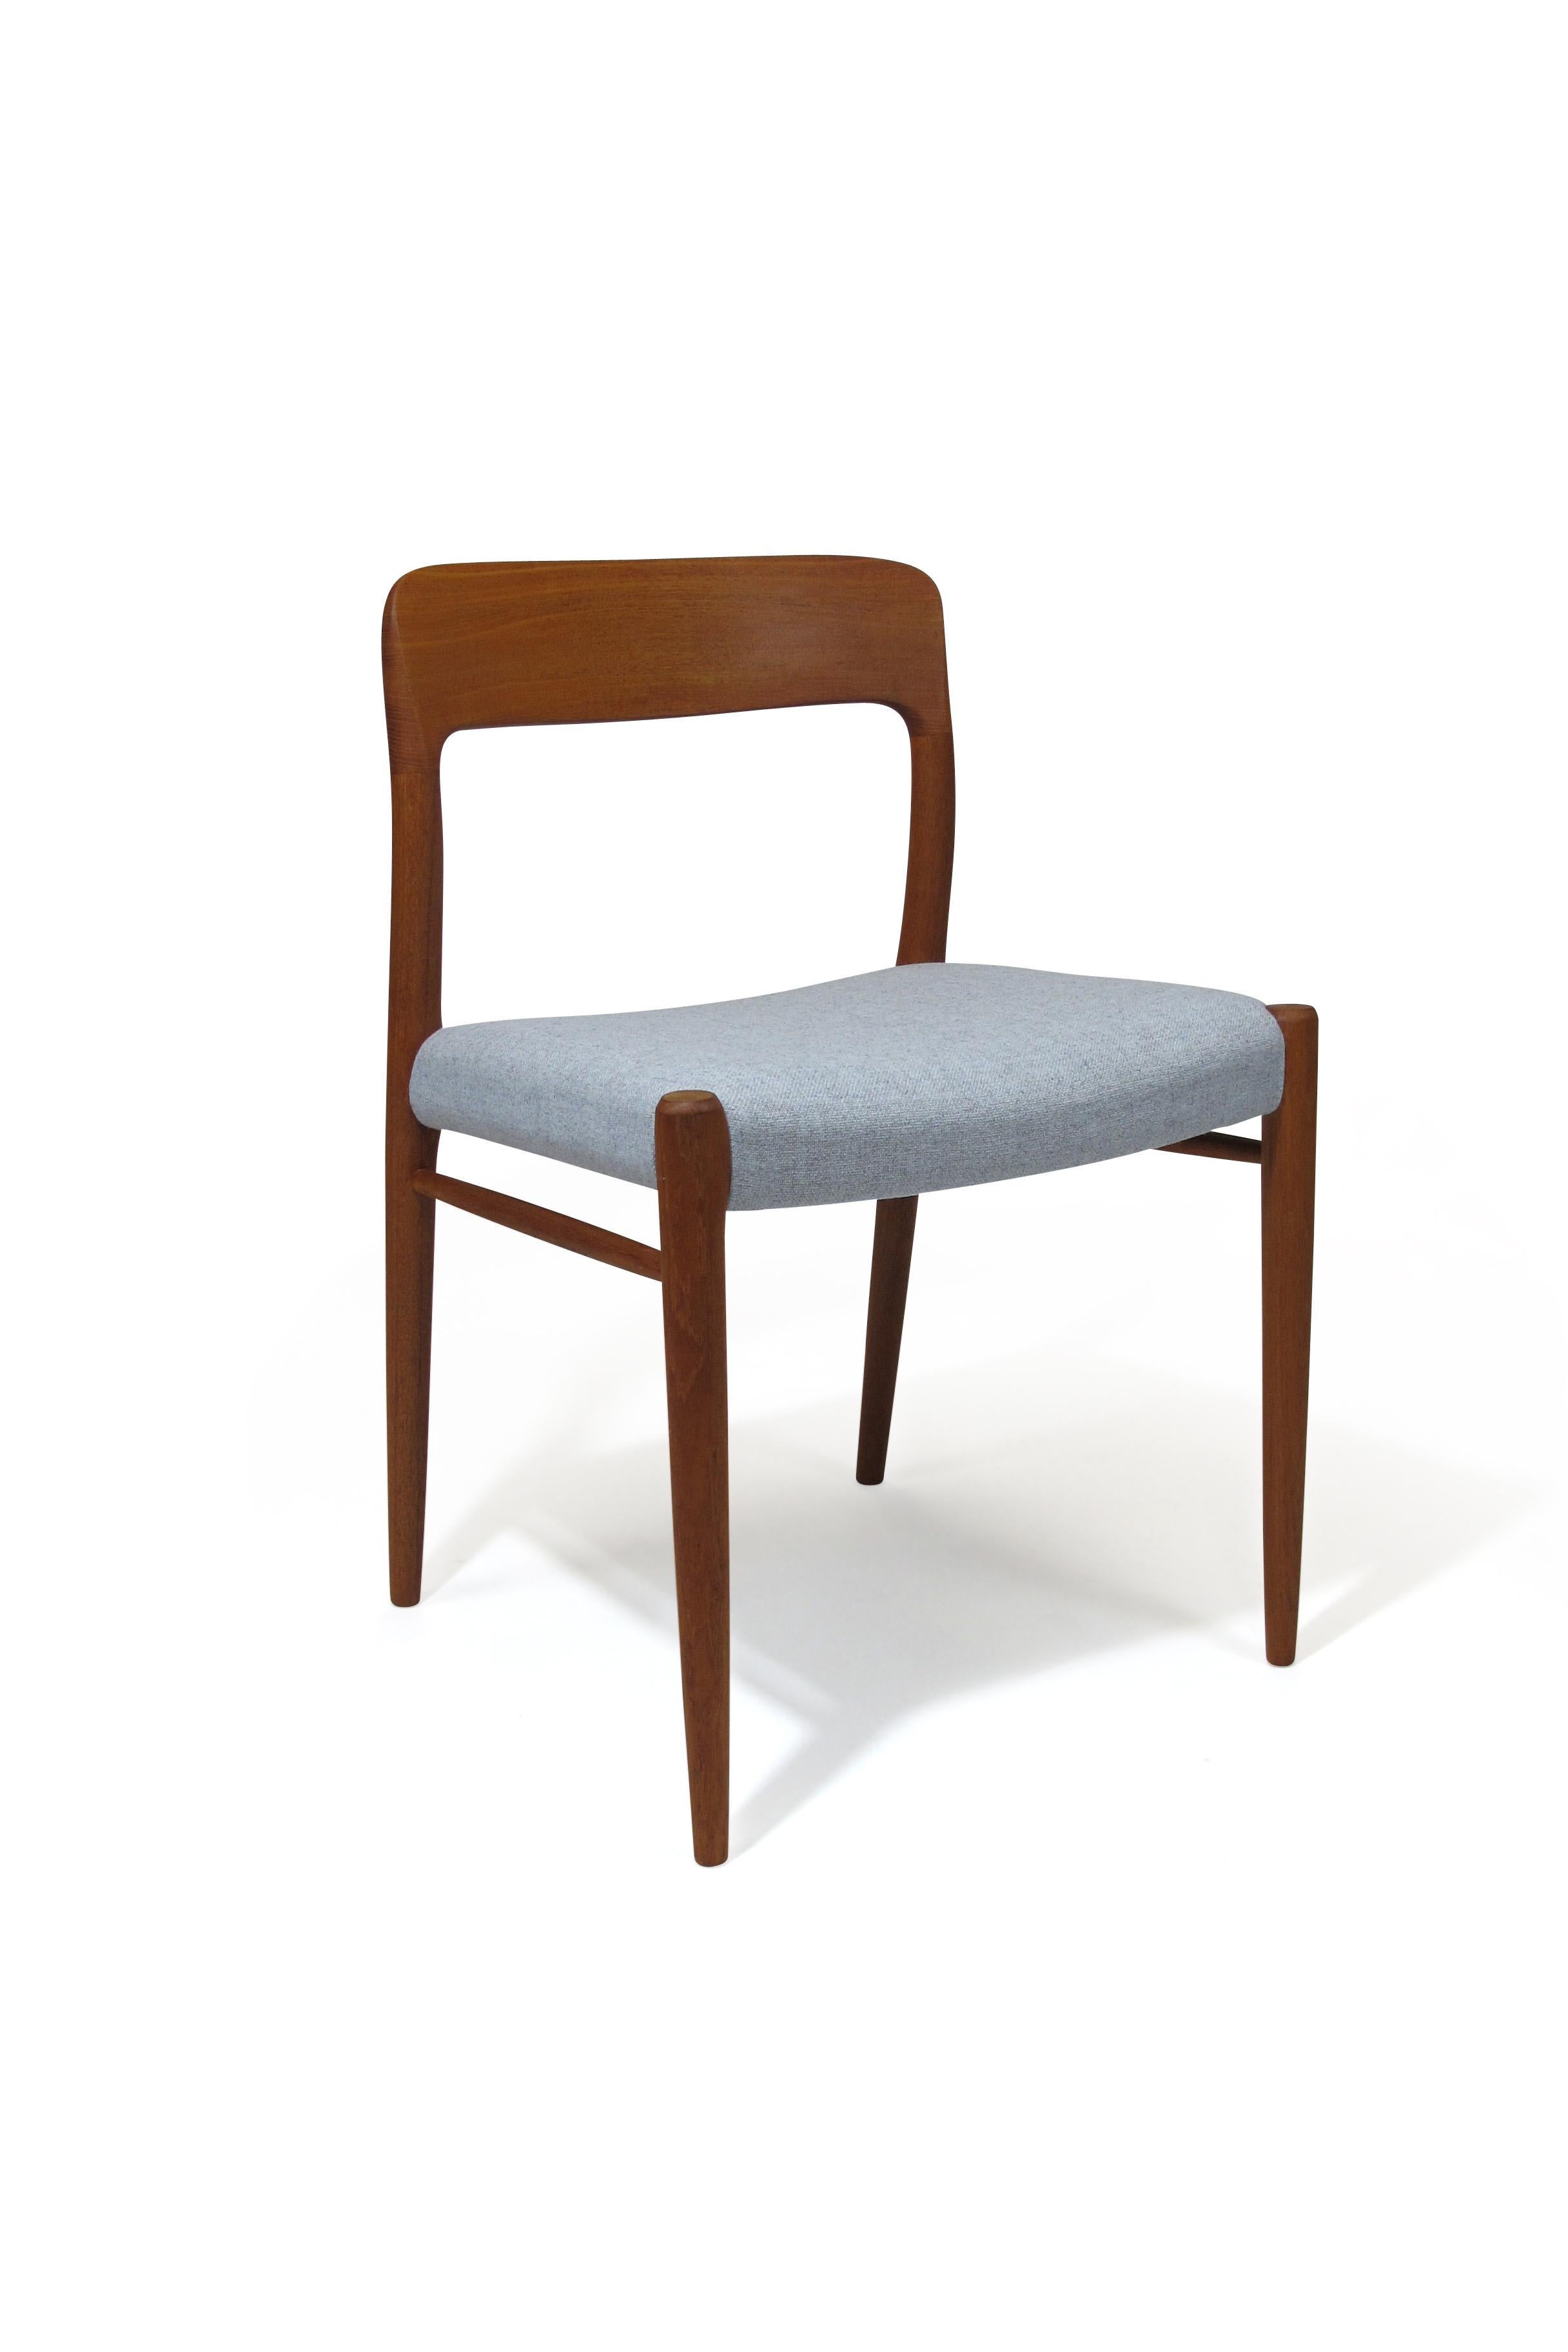 Oiled JL Moller Teak Dining Chairs